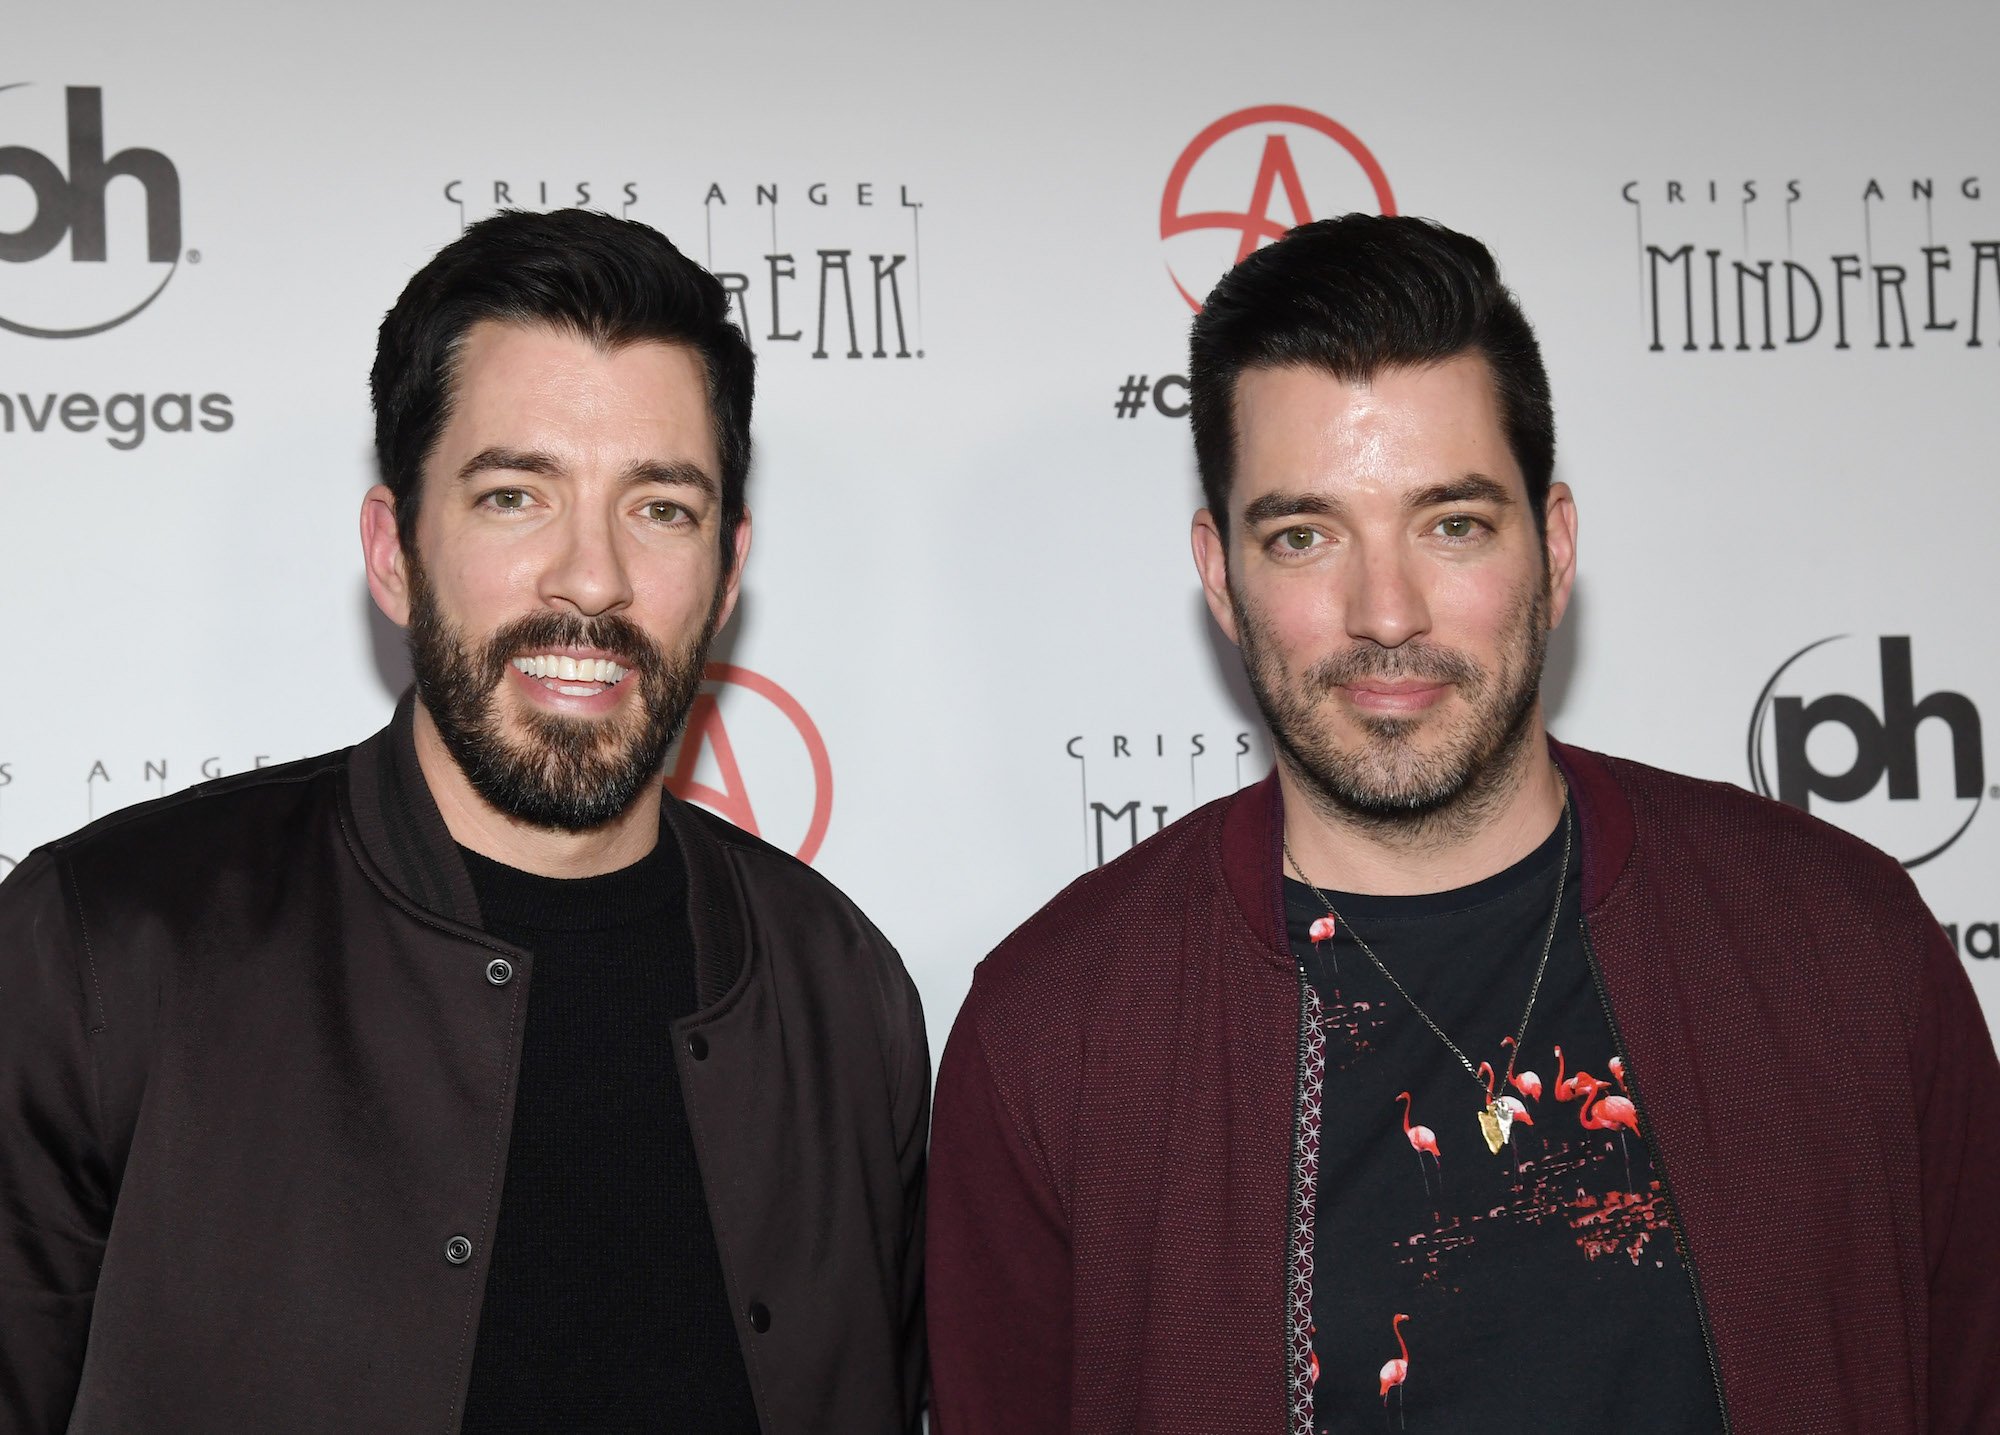 (L-R) Drew Scott and Jonathan Scott smiling in front of a white background